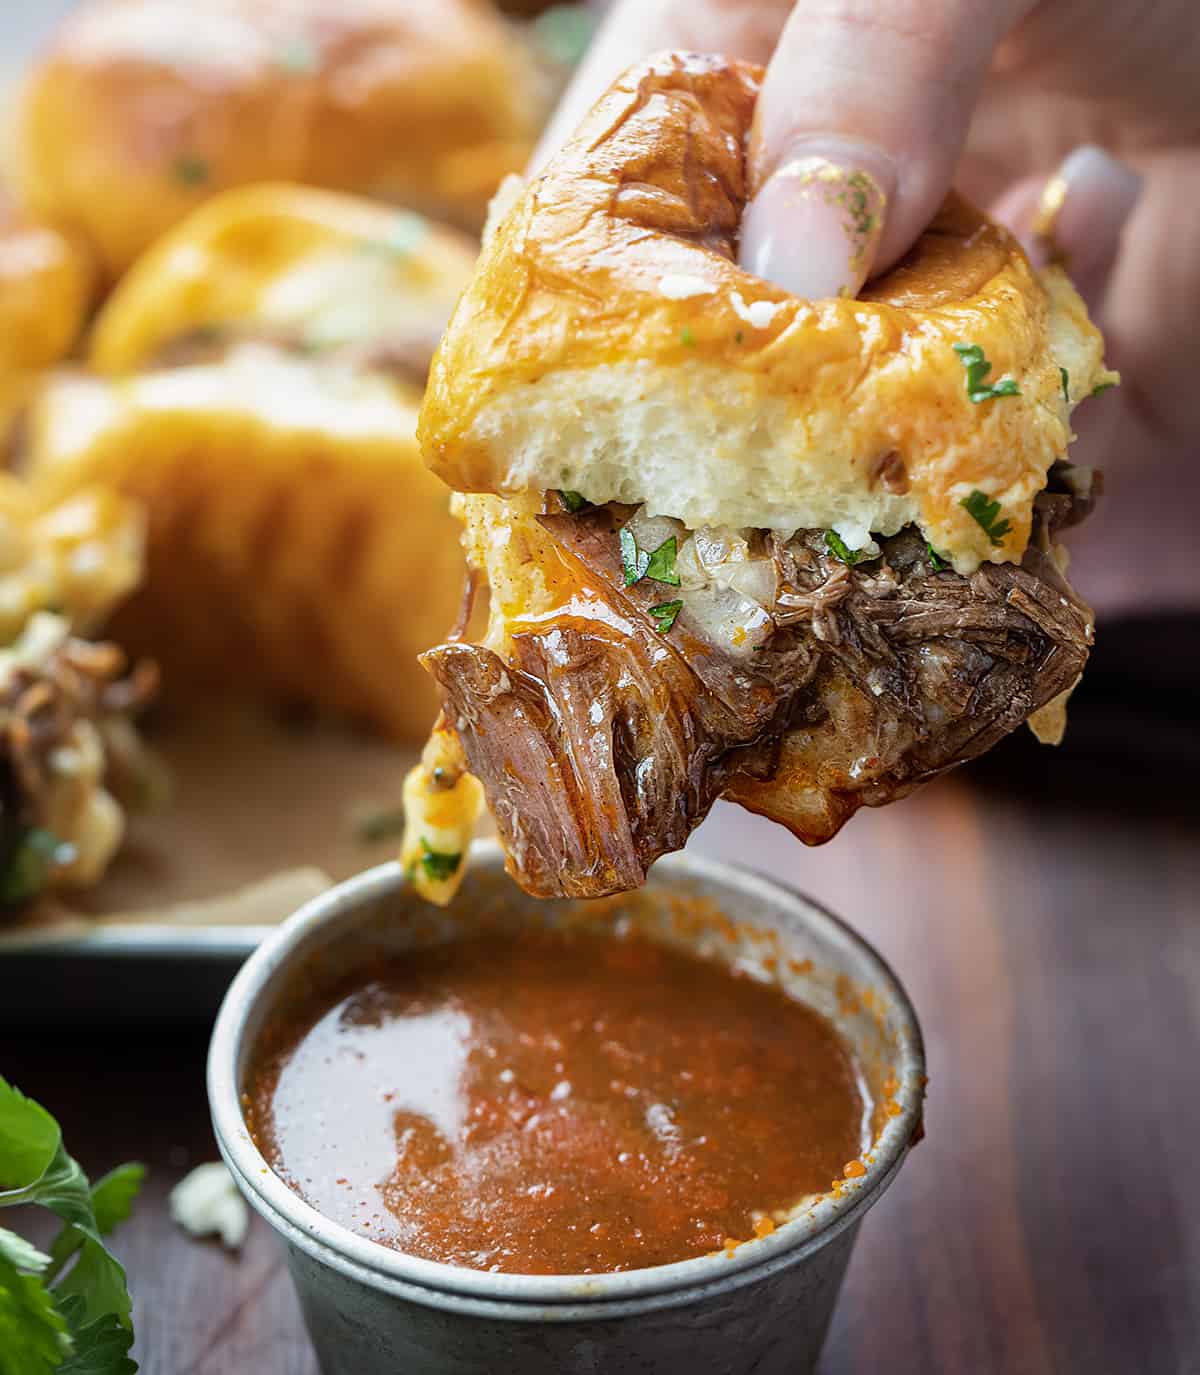 Hand Holding a Shredded Beef Slider and Dipping into Sauce.